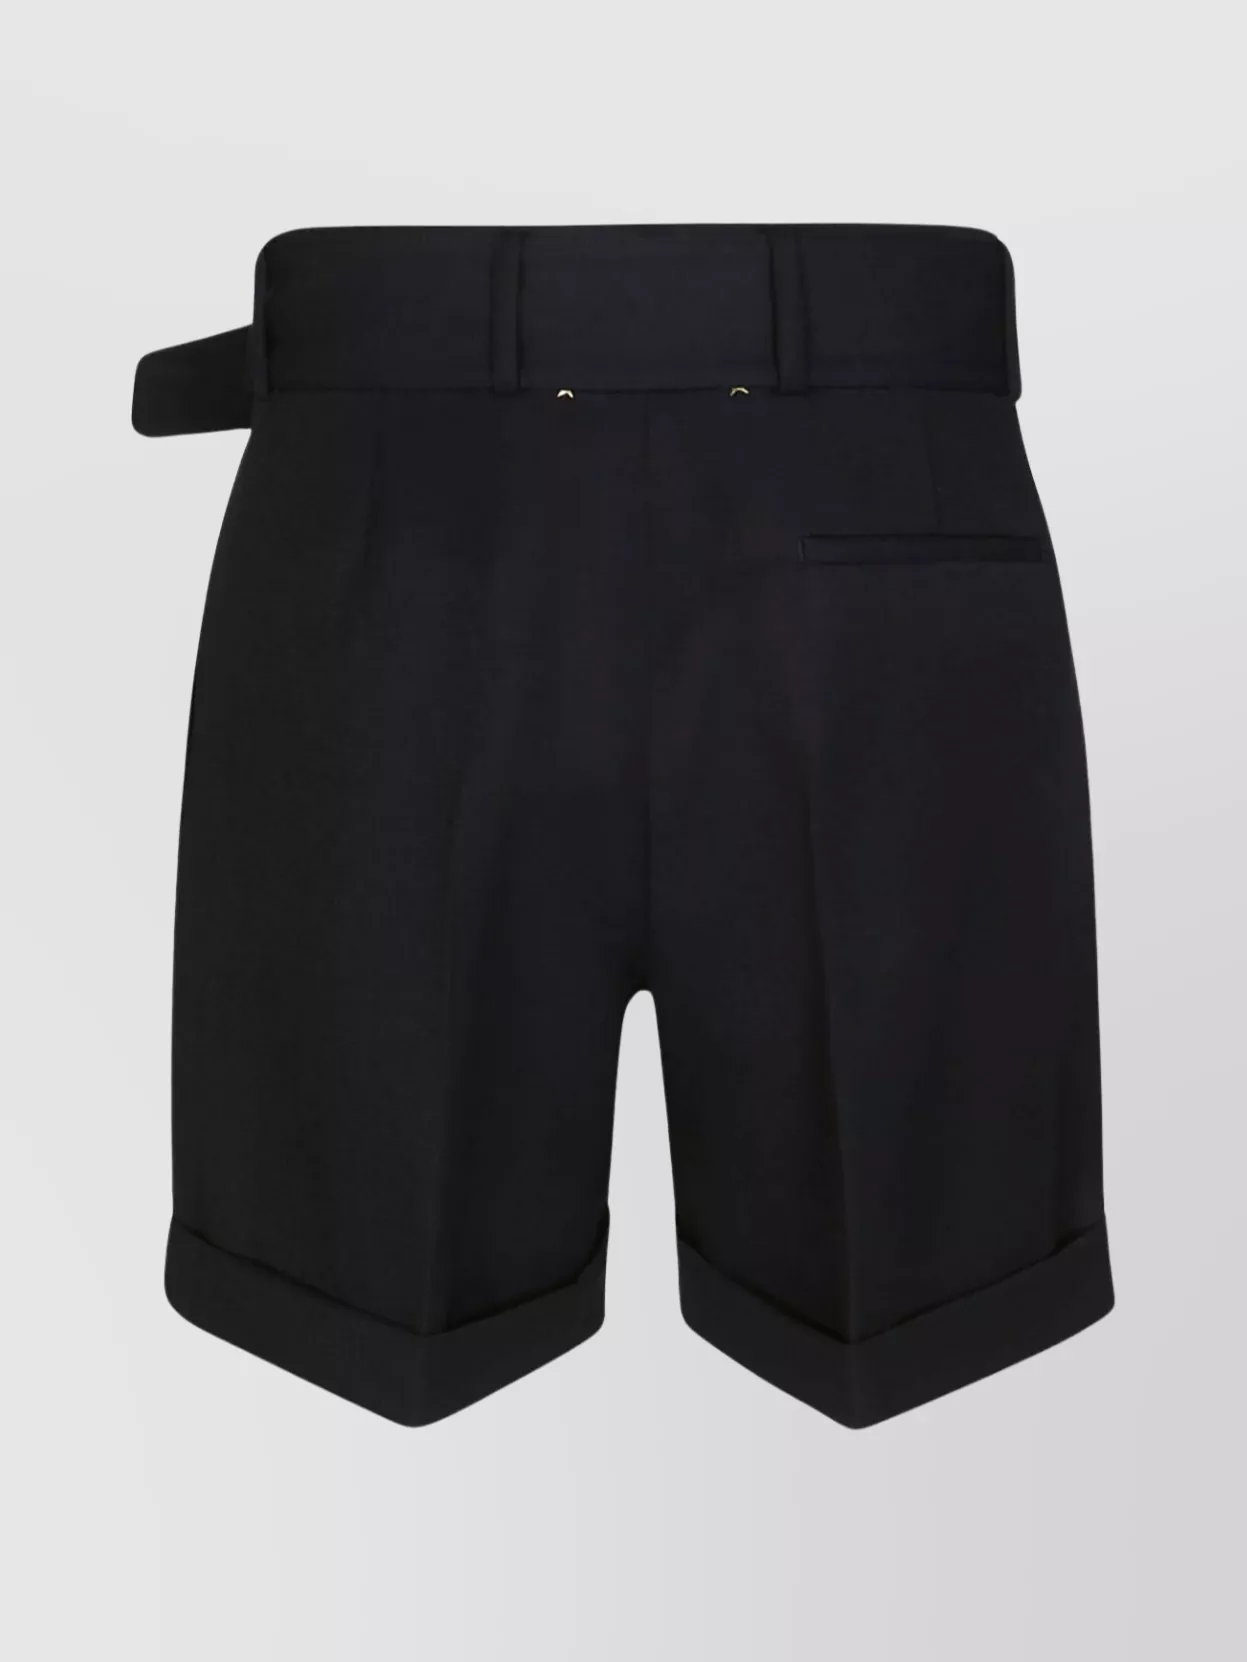 Golden Goose Pleated Tailored Shorts Cuffed Hem In Black